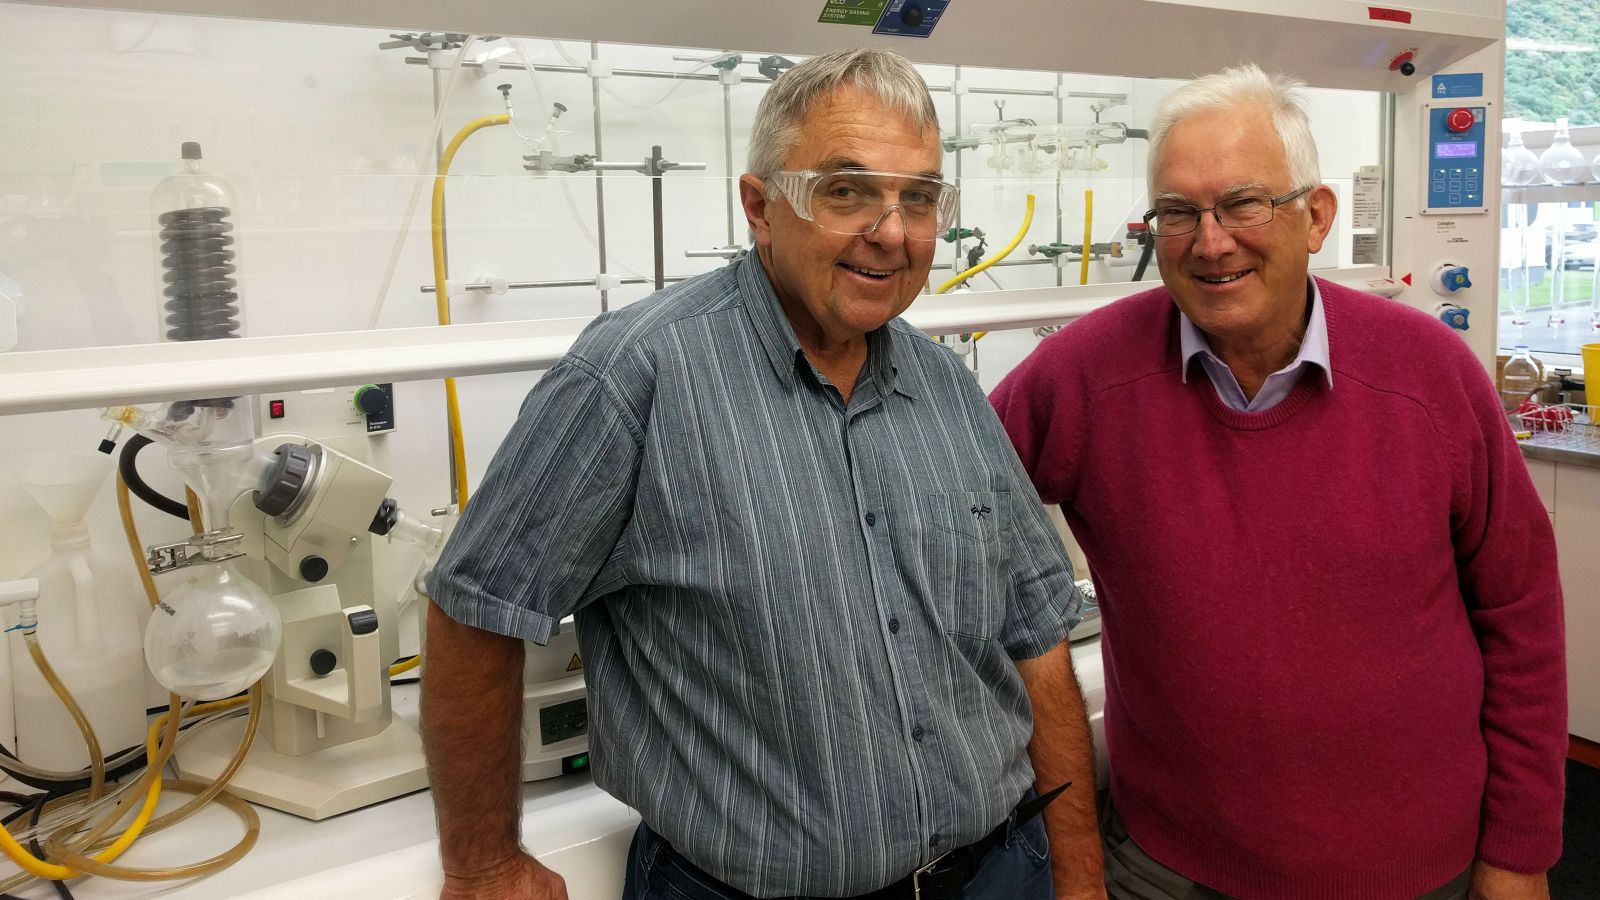 Peter Tyler stands with Richard Furneaux in a Ferrier lab